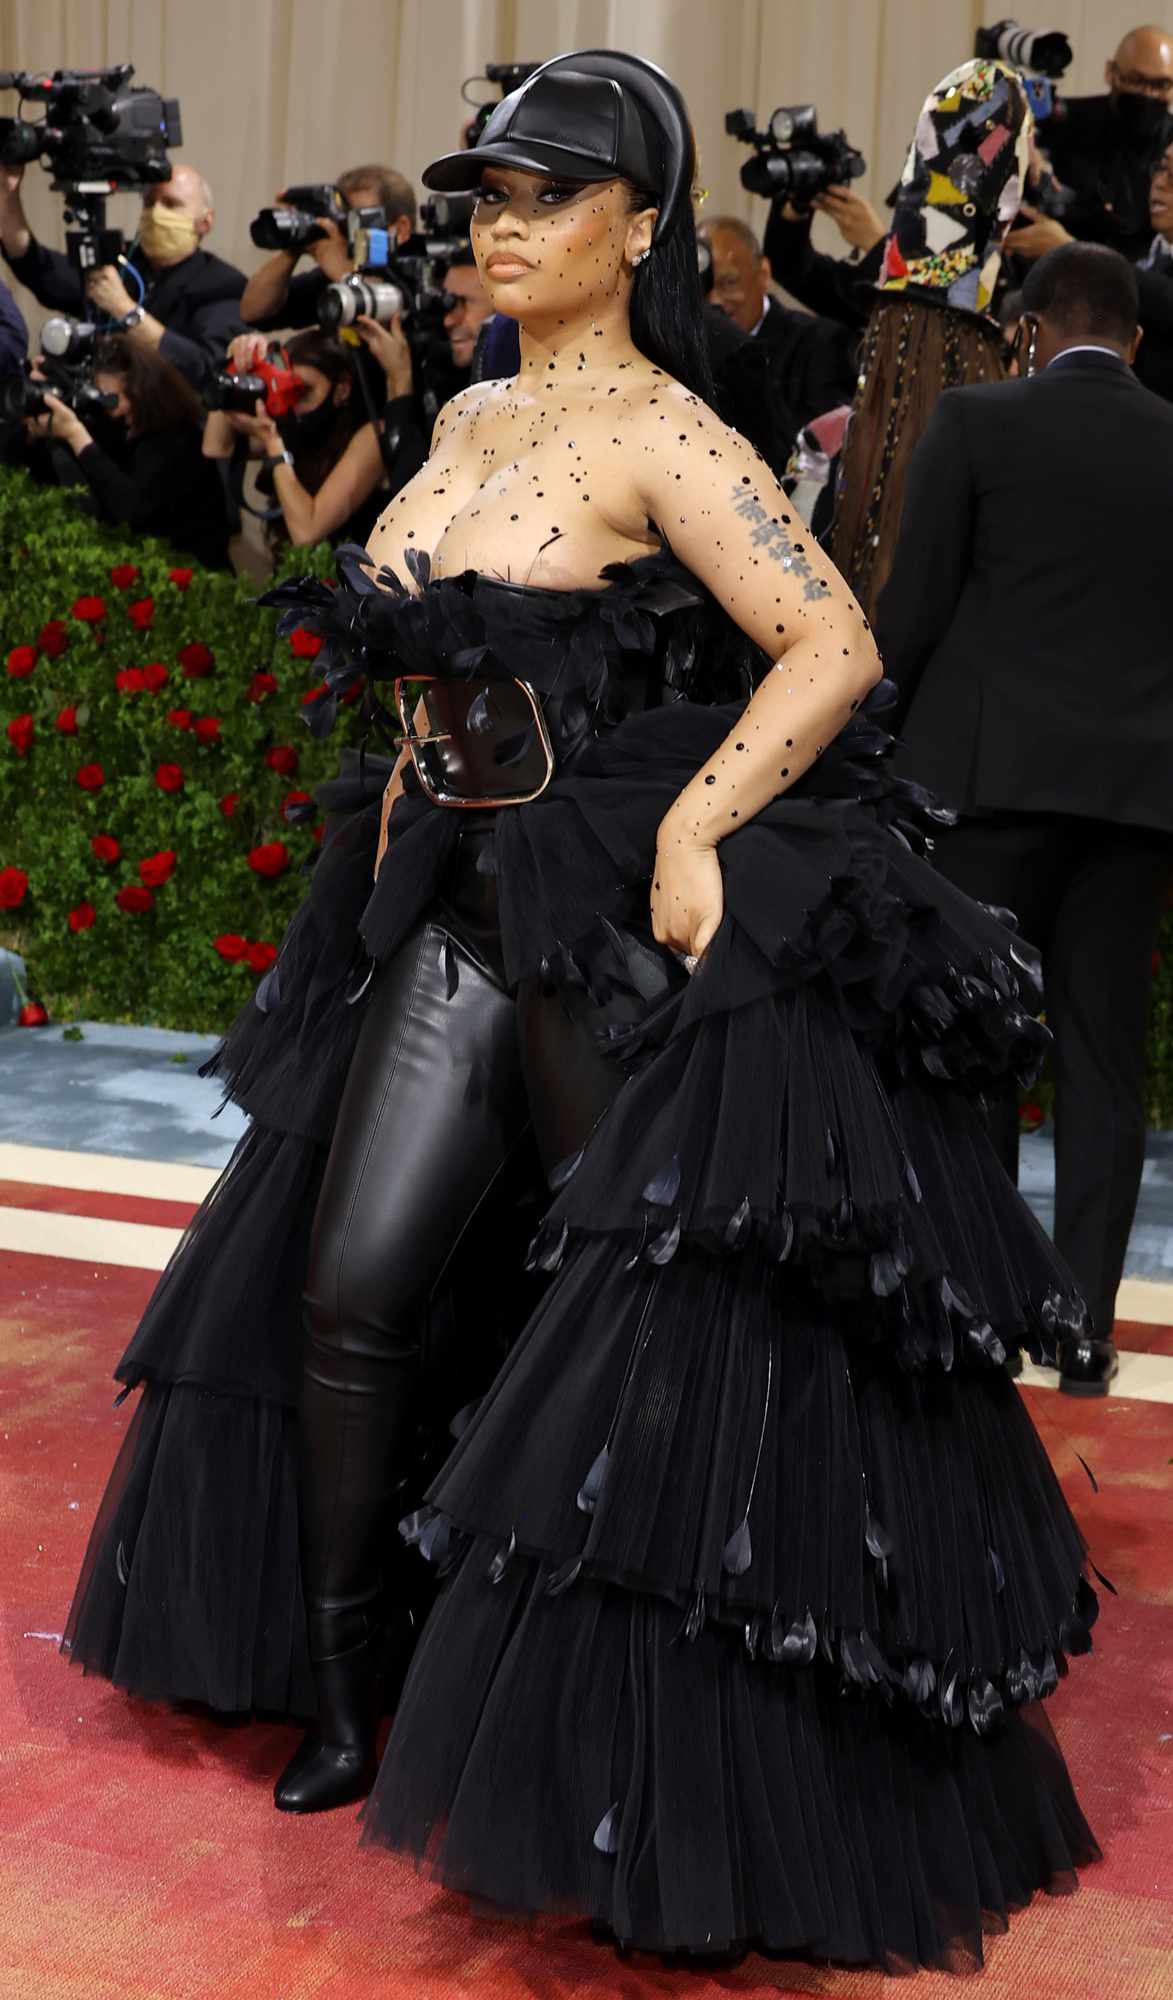 Nicki Minaj attends The 2022 Met Gala Celebrating "In America: An Anthology of Fashion" at The Metropolitan Museum of Art on May 02, 2022 in New York City.